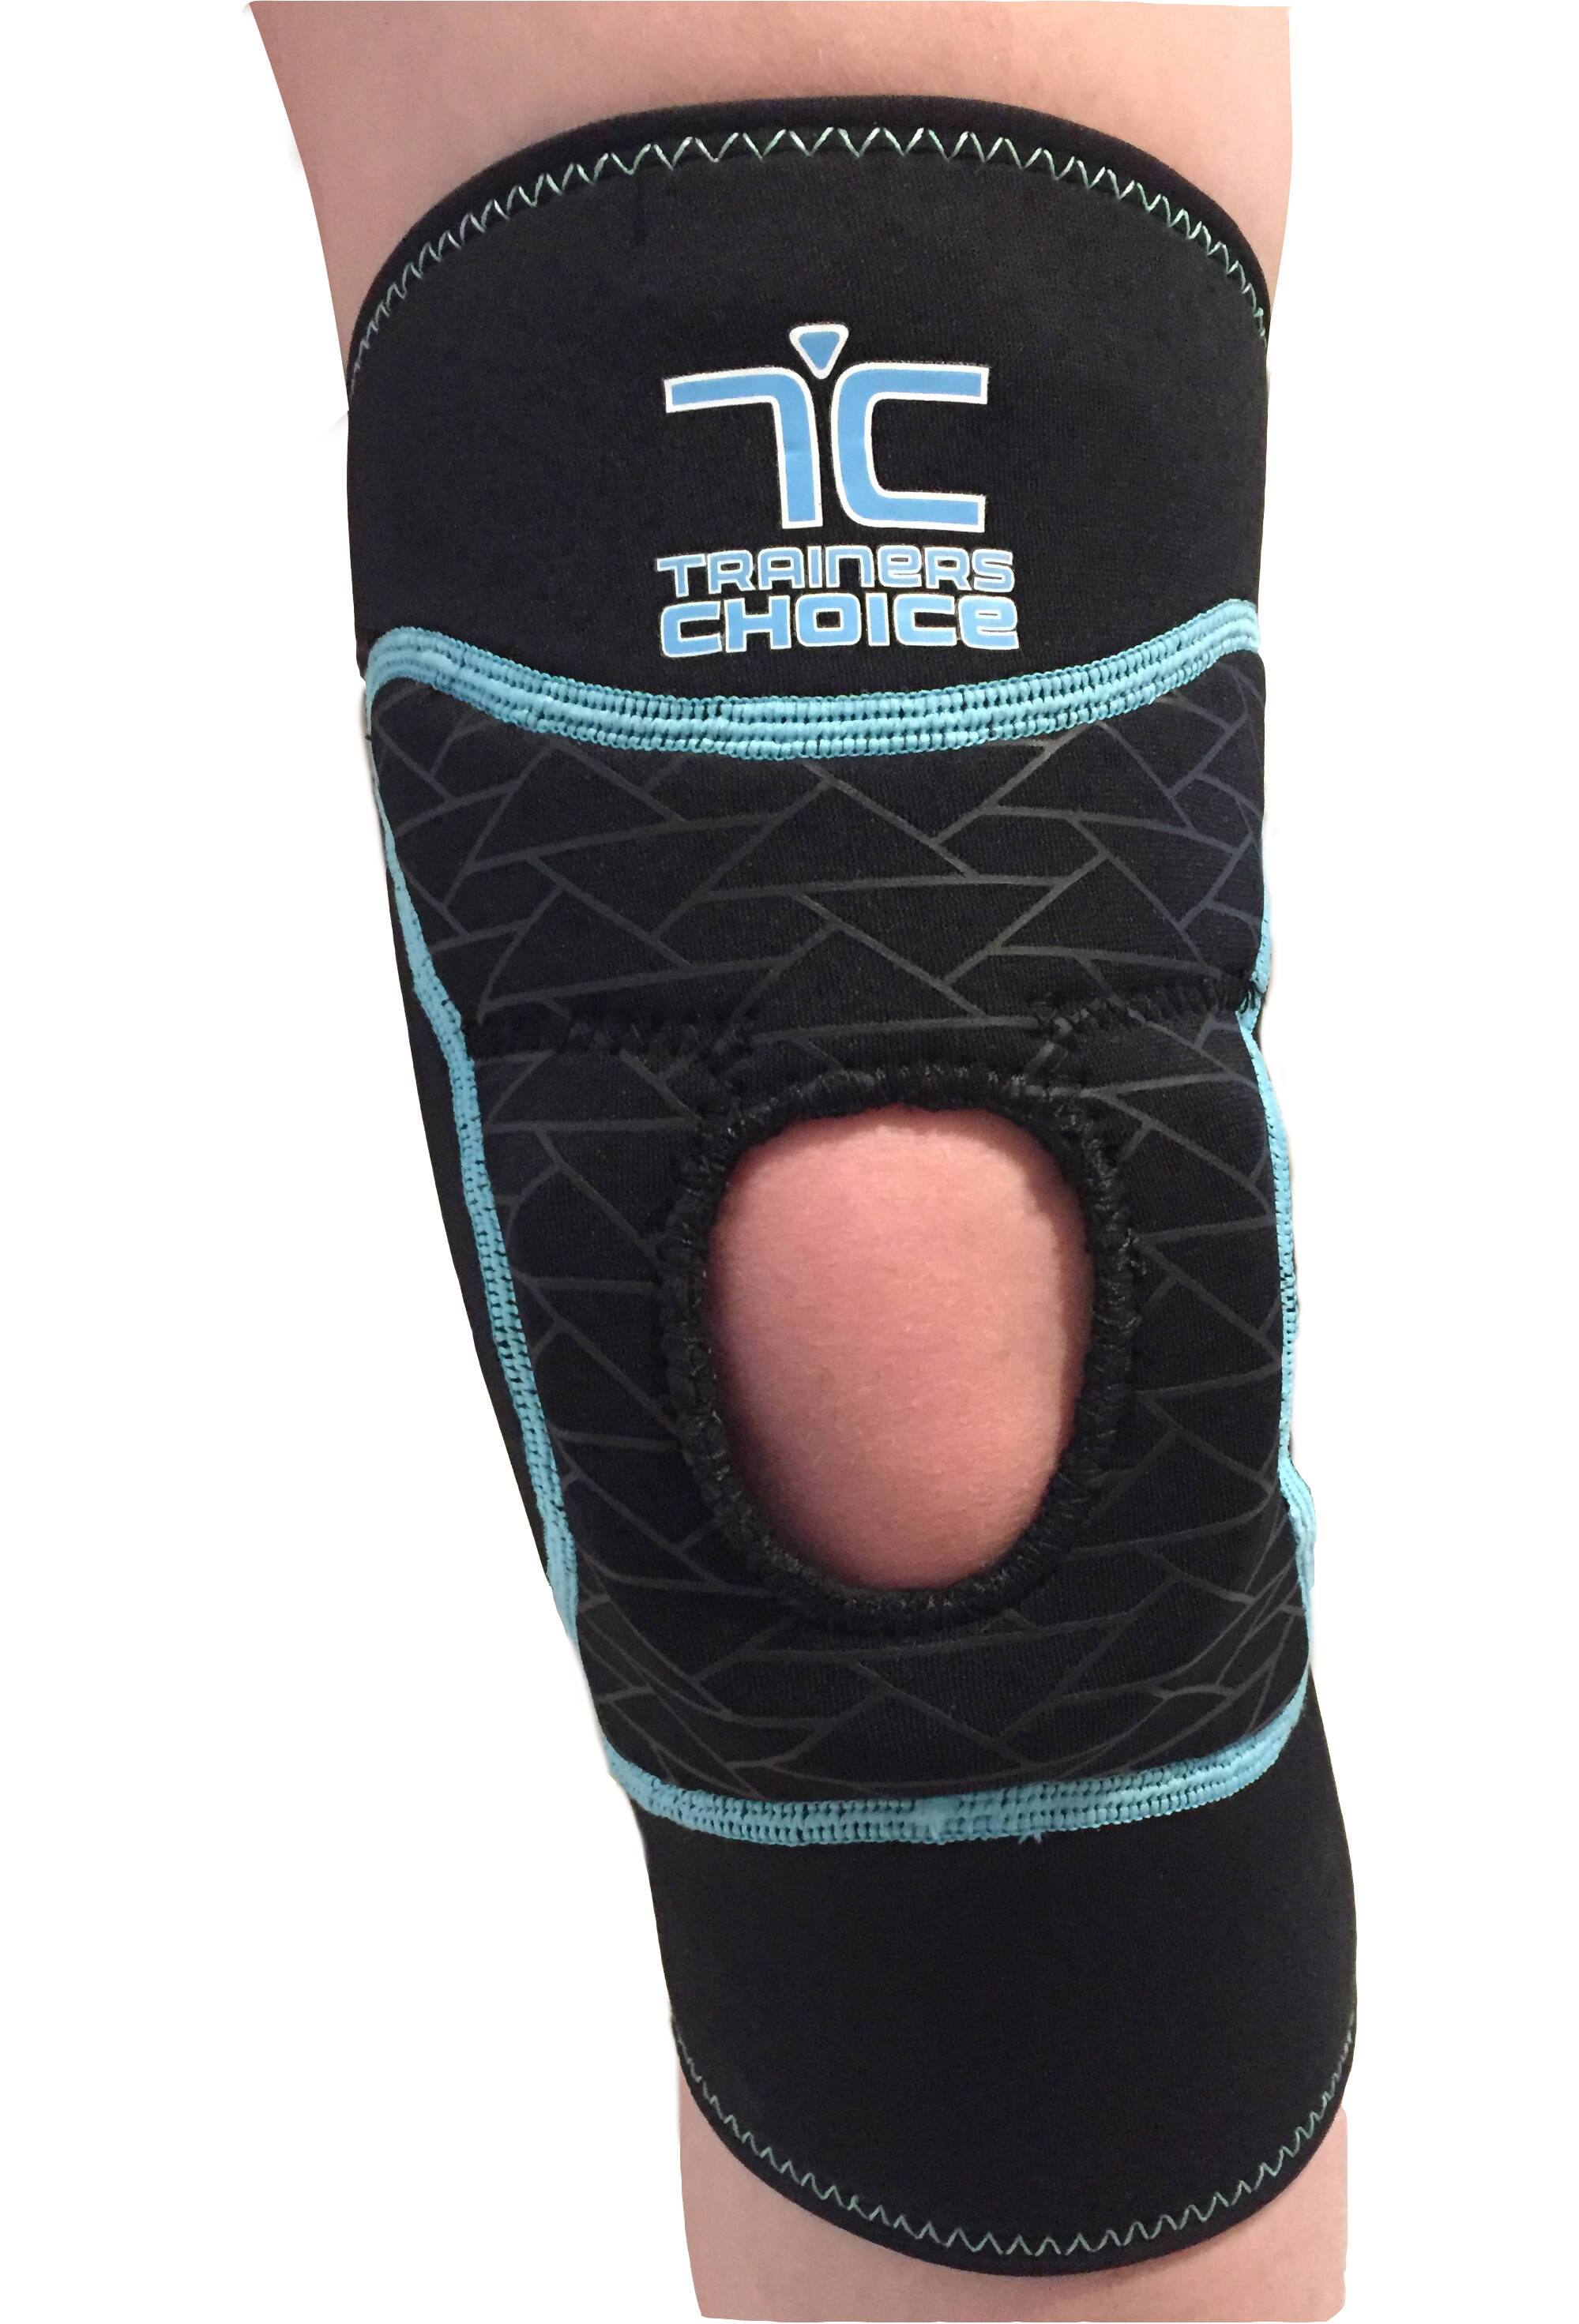 2486 Modetro Sports Knee Compression Sleeve - Knee Support